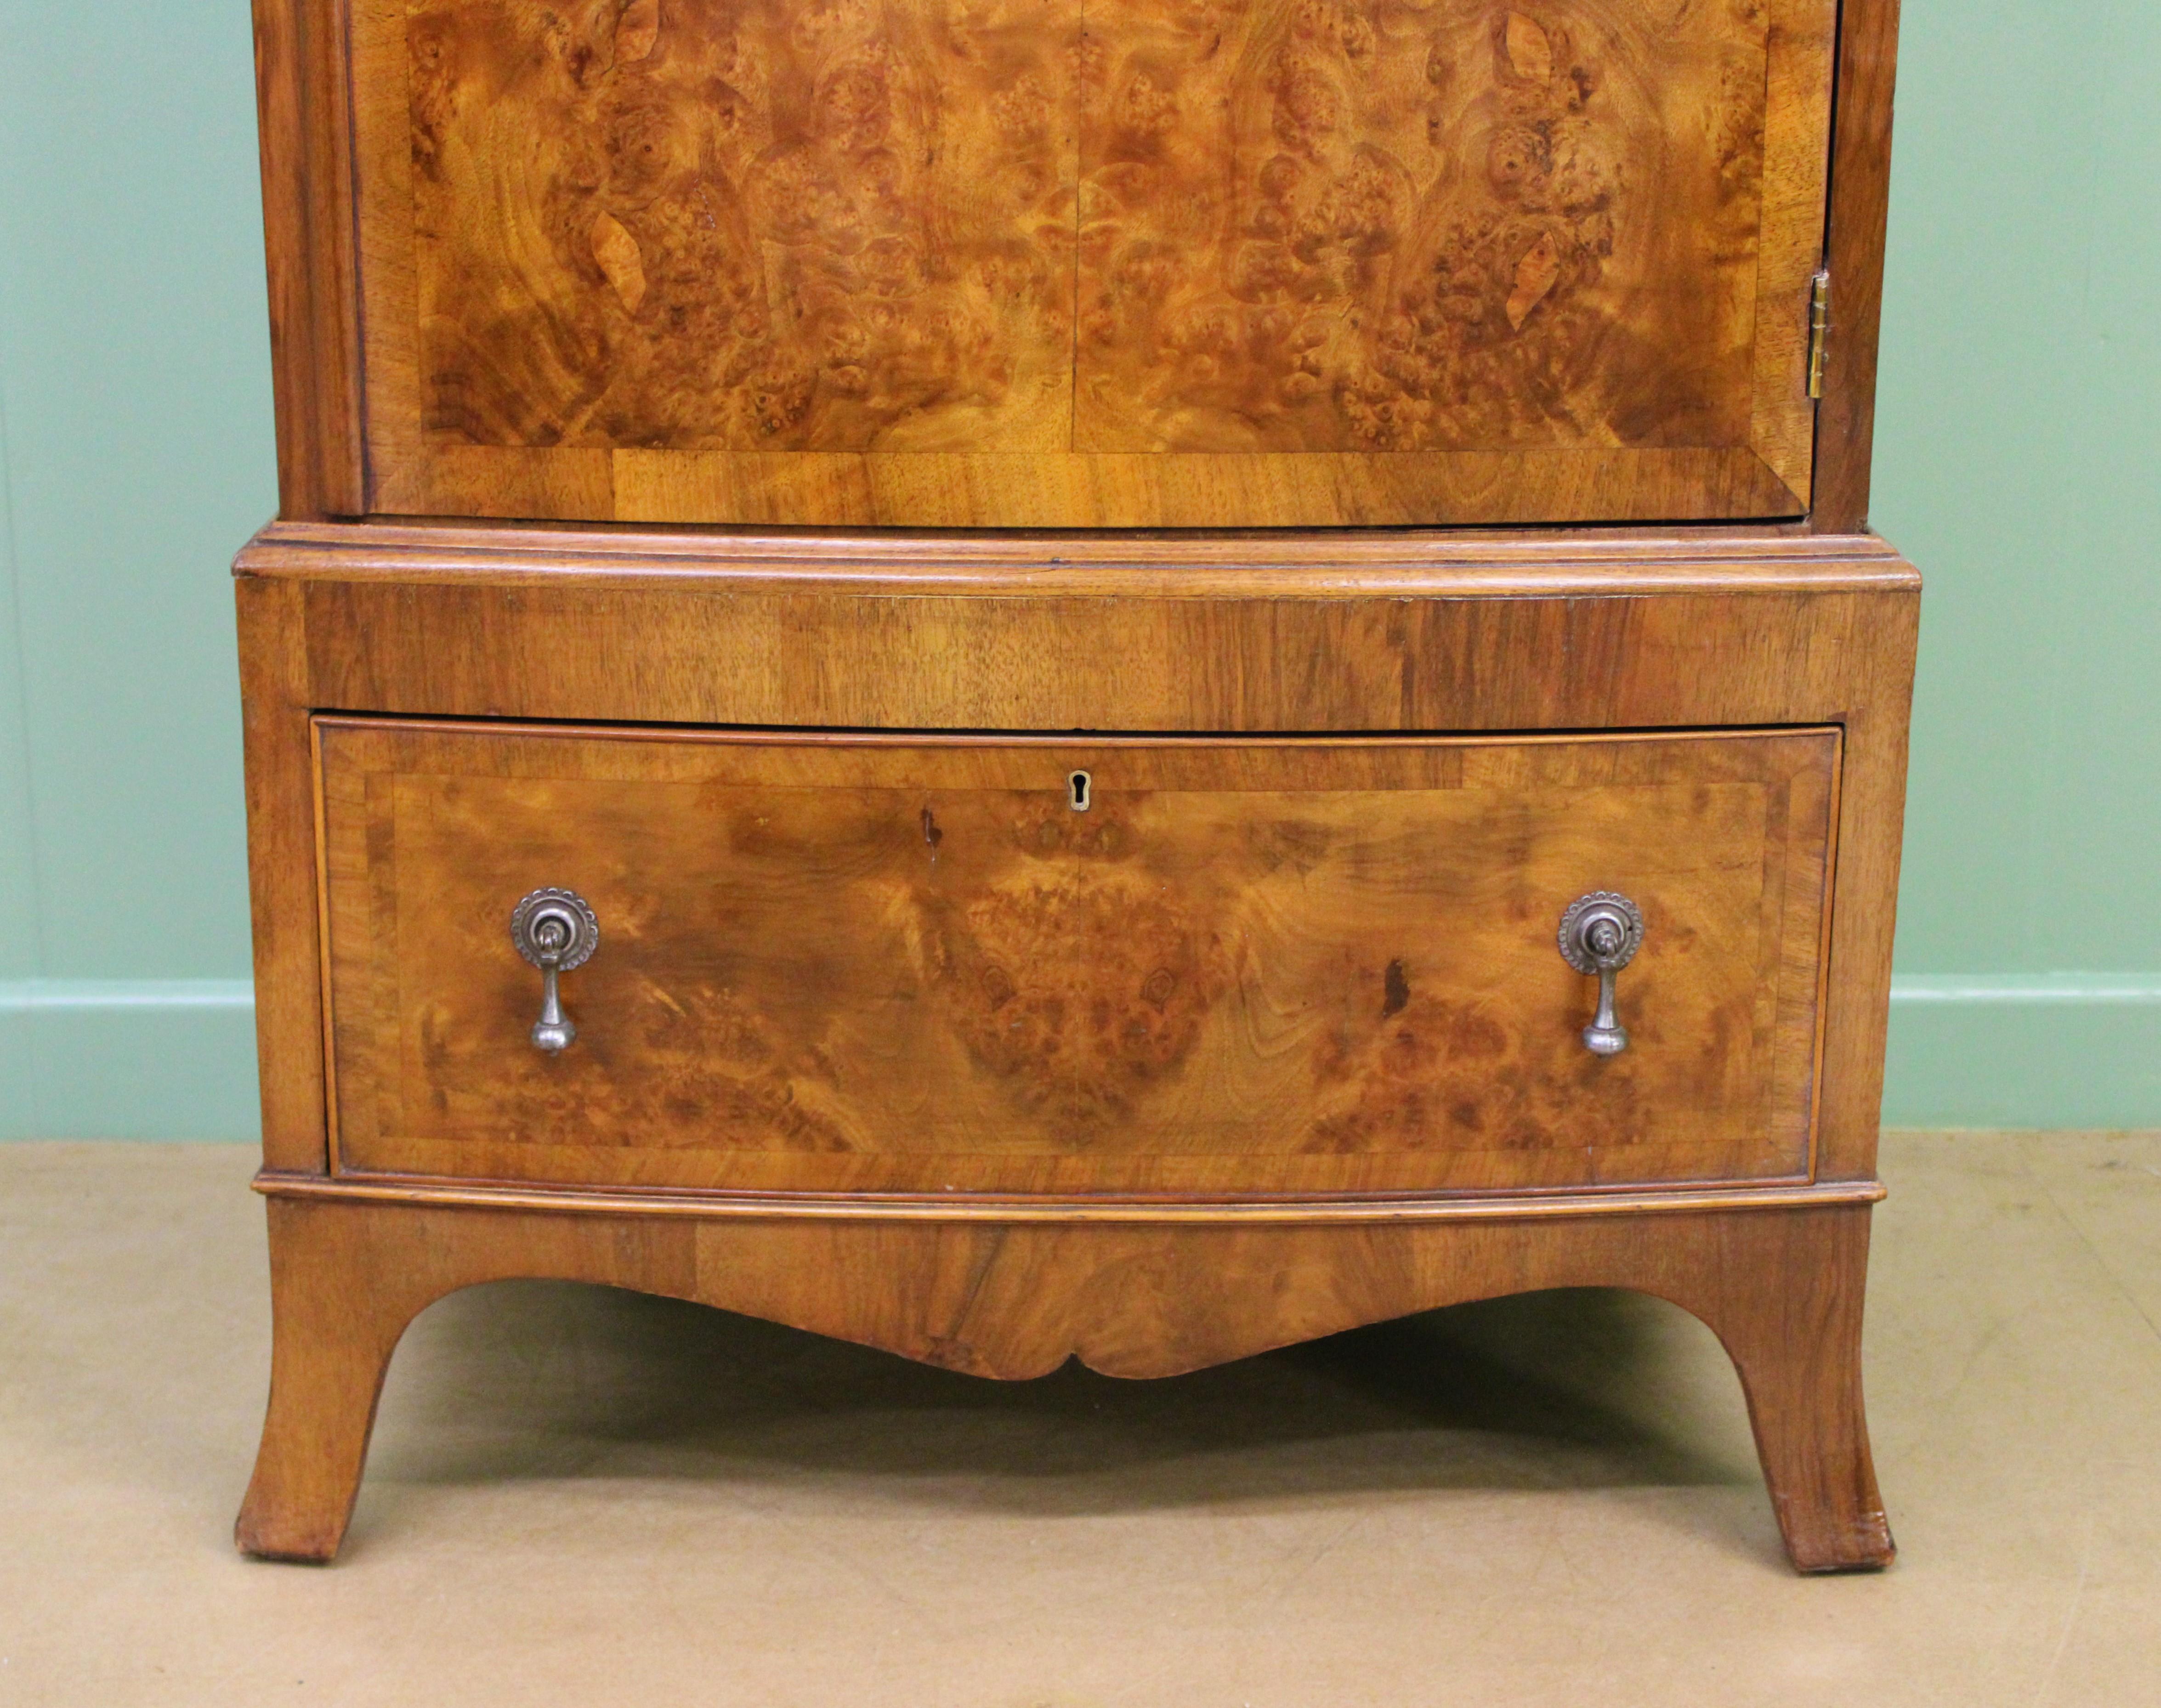 A good burr walnut bow fronted wardrobe of slender proportions. Well made in the queen Anne style in solid walnut with attractive burr walnut veneers. The single cupboard door (lockable, key supplied) opens to reveal storage space with a hanging